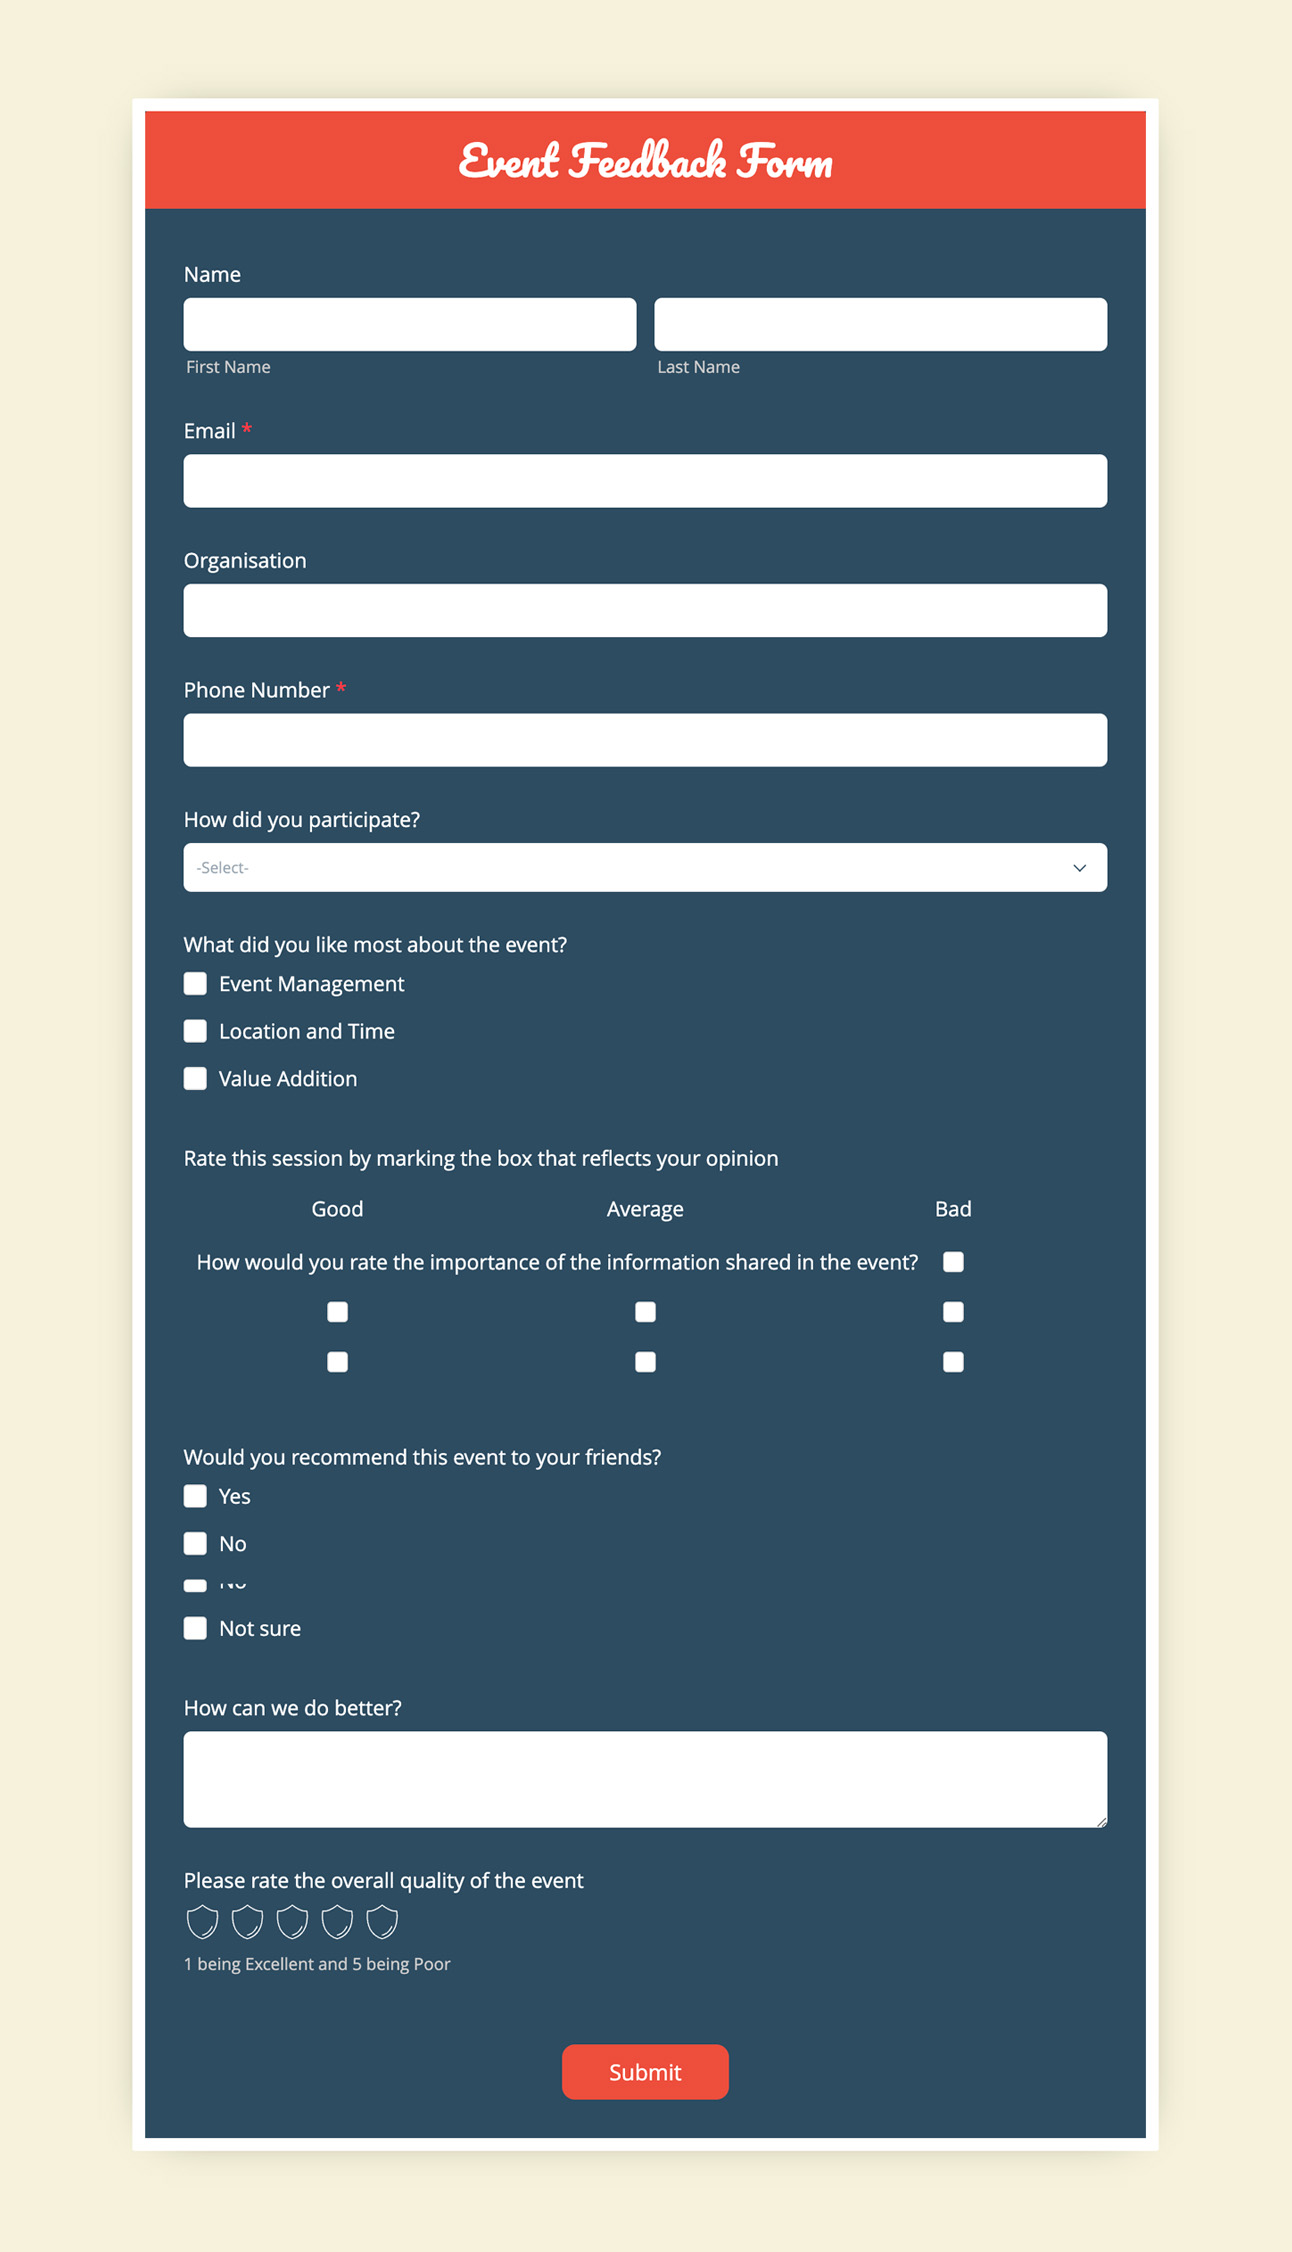 Request Form Templates - Zoho Forms